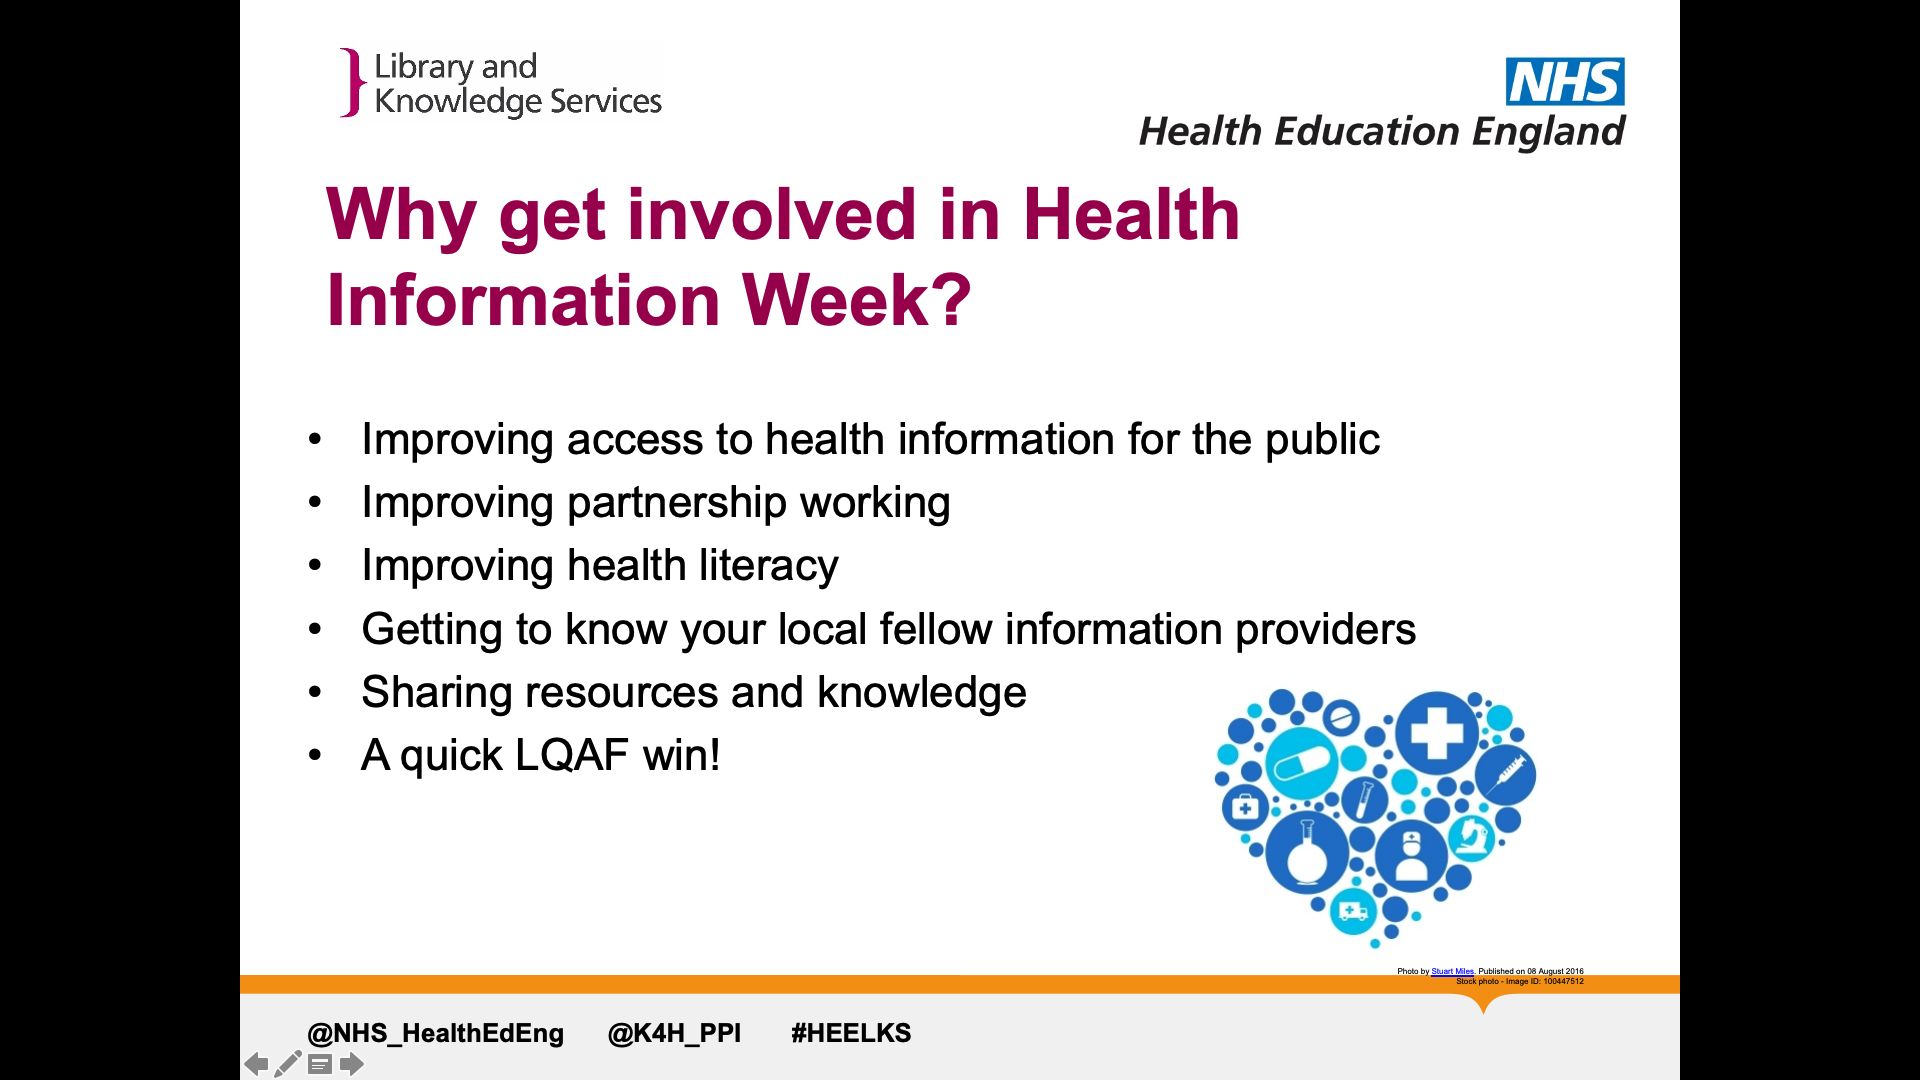 Title: Why get involved in health information week? Text on page: Improving access to health information for the public Improving partnership working Improving health literacy Getting to know your local fellow information providers Sharing resources and knowledge A quick LQAF win!